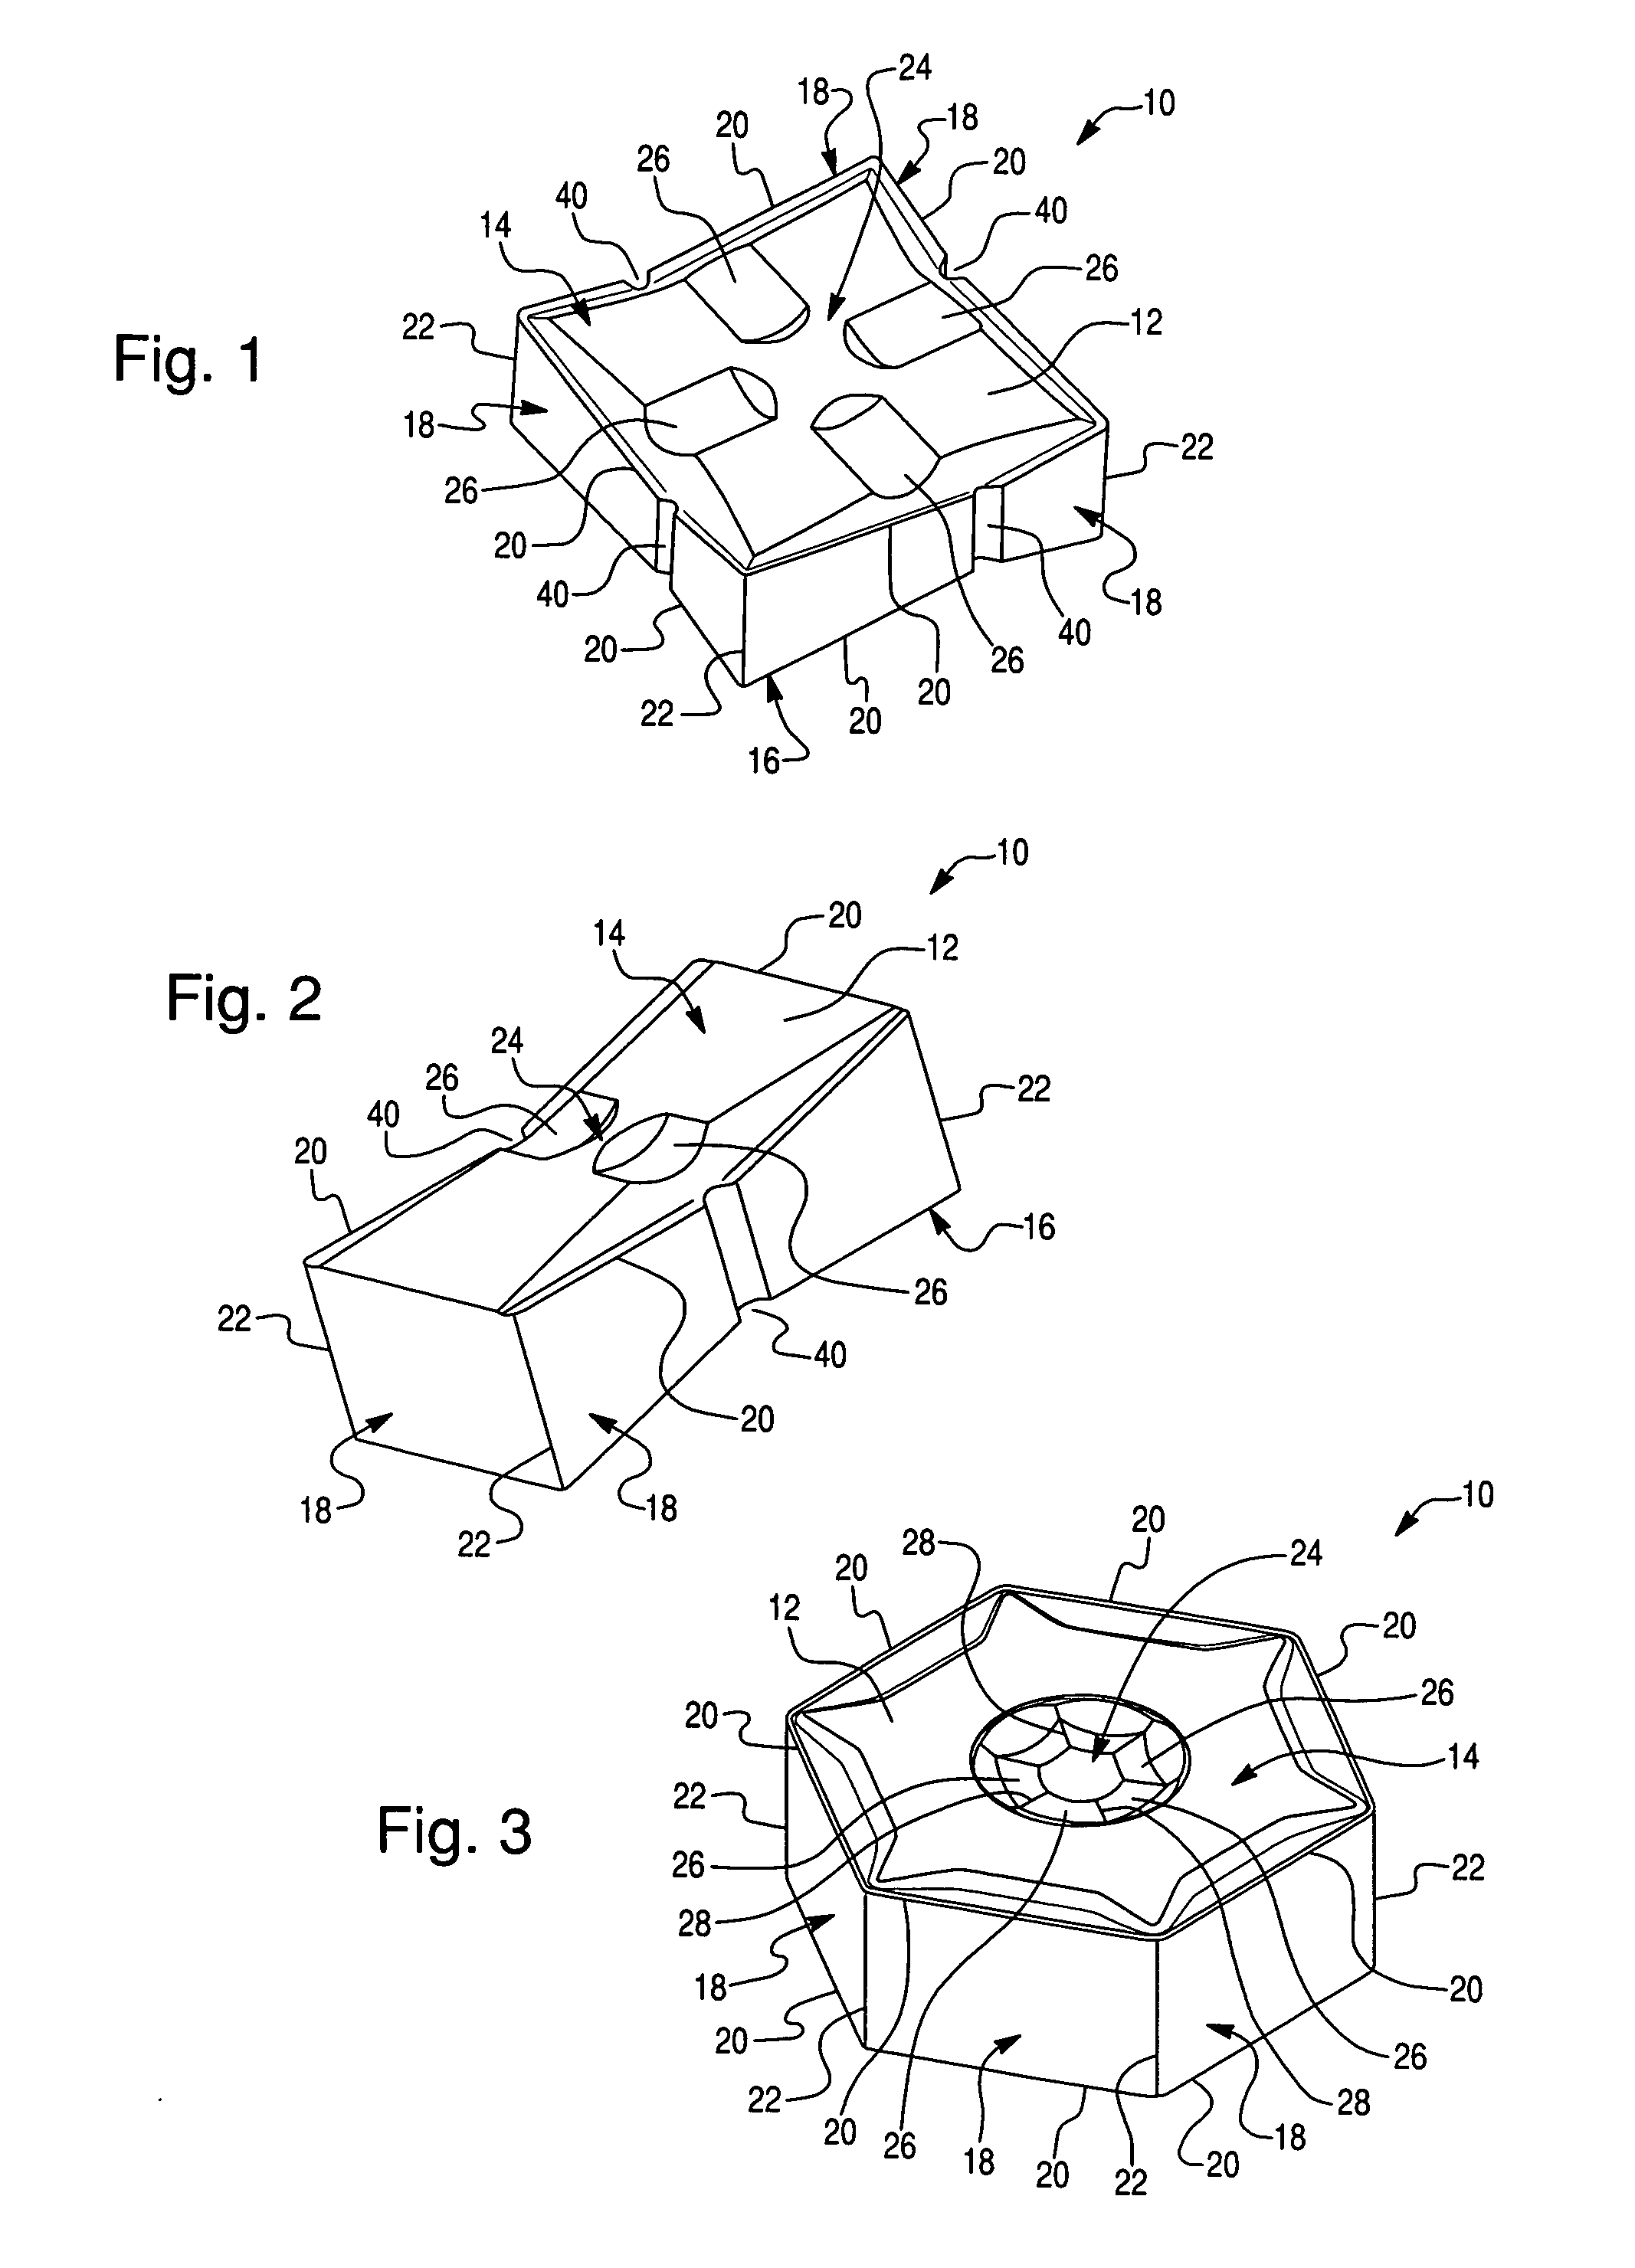 Side locking insert and material removal tool with same